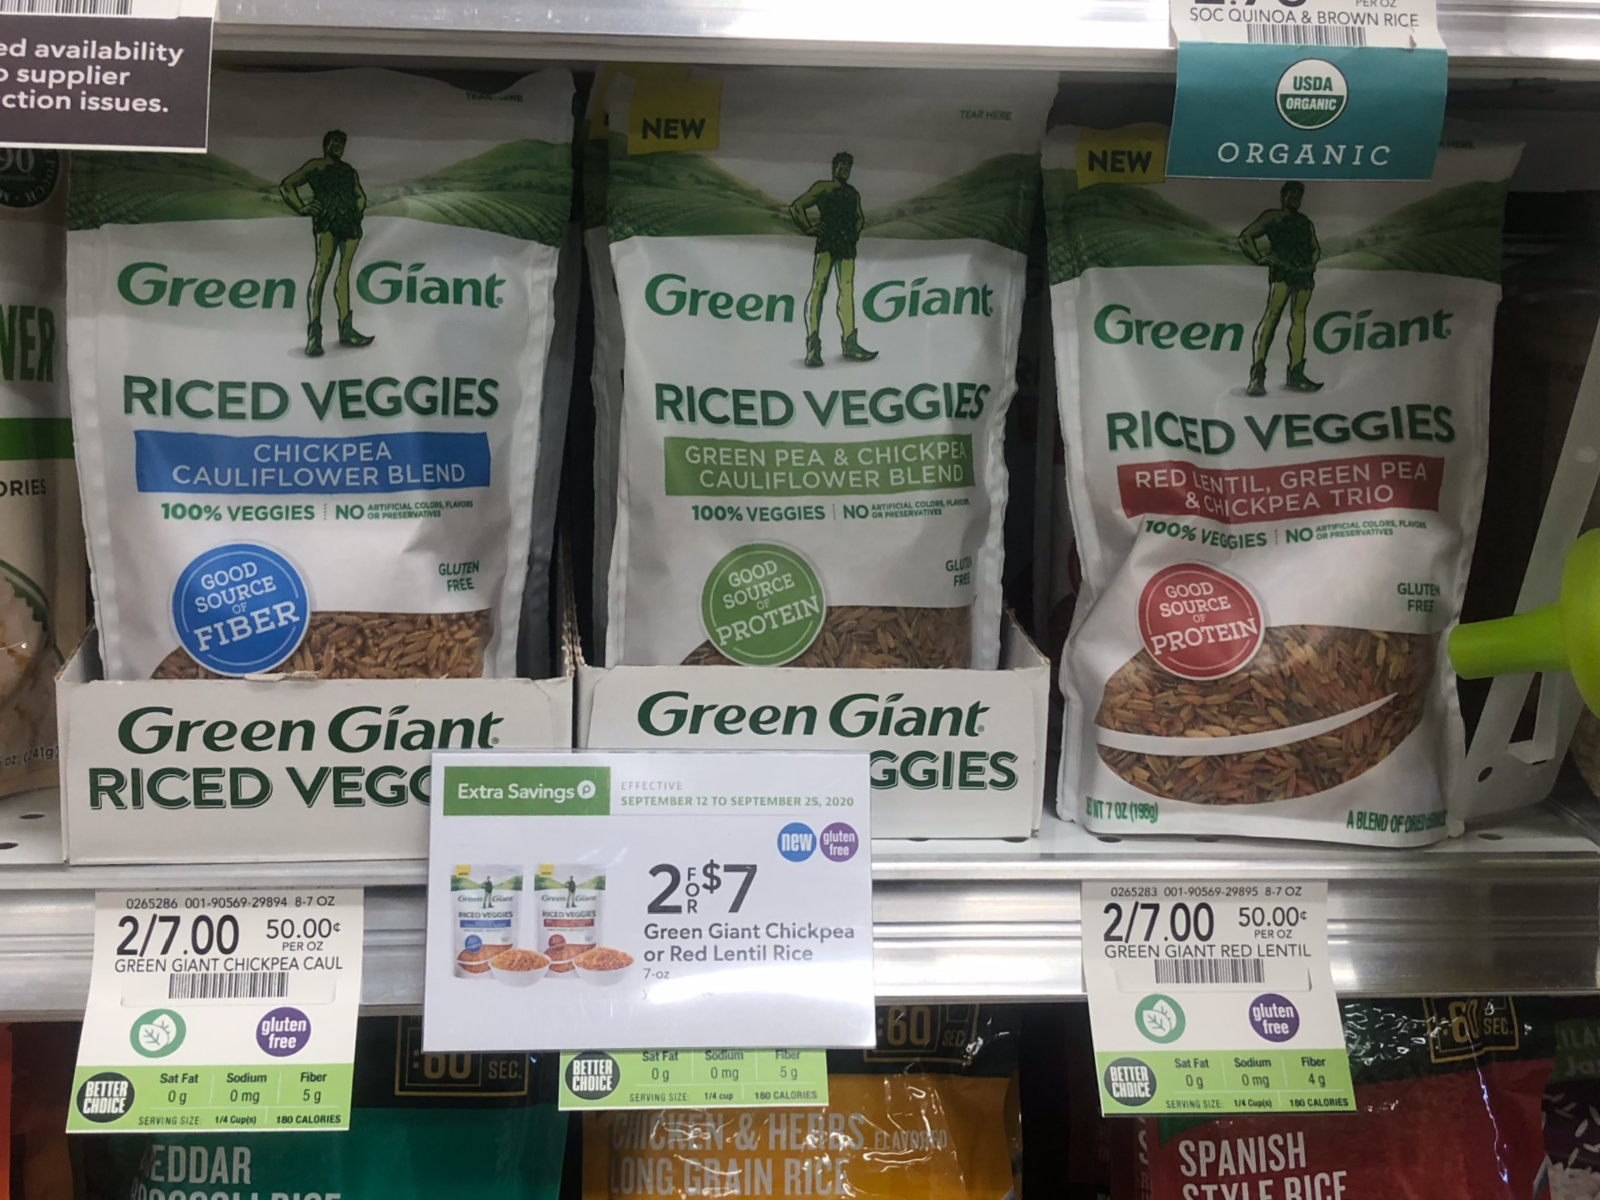 Greek Riced Veggie Salad - Perfect Meal To Go With The Sale On Green Giant® Riced Veggies At Publix! on I Heart Publix